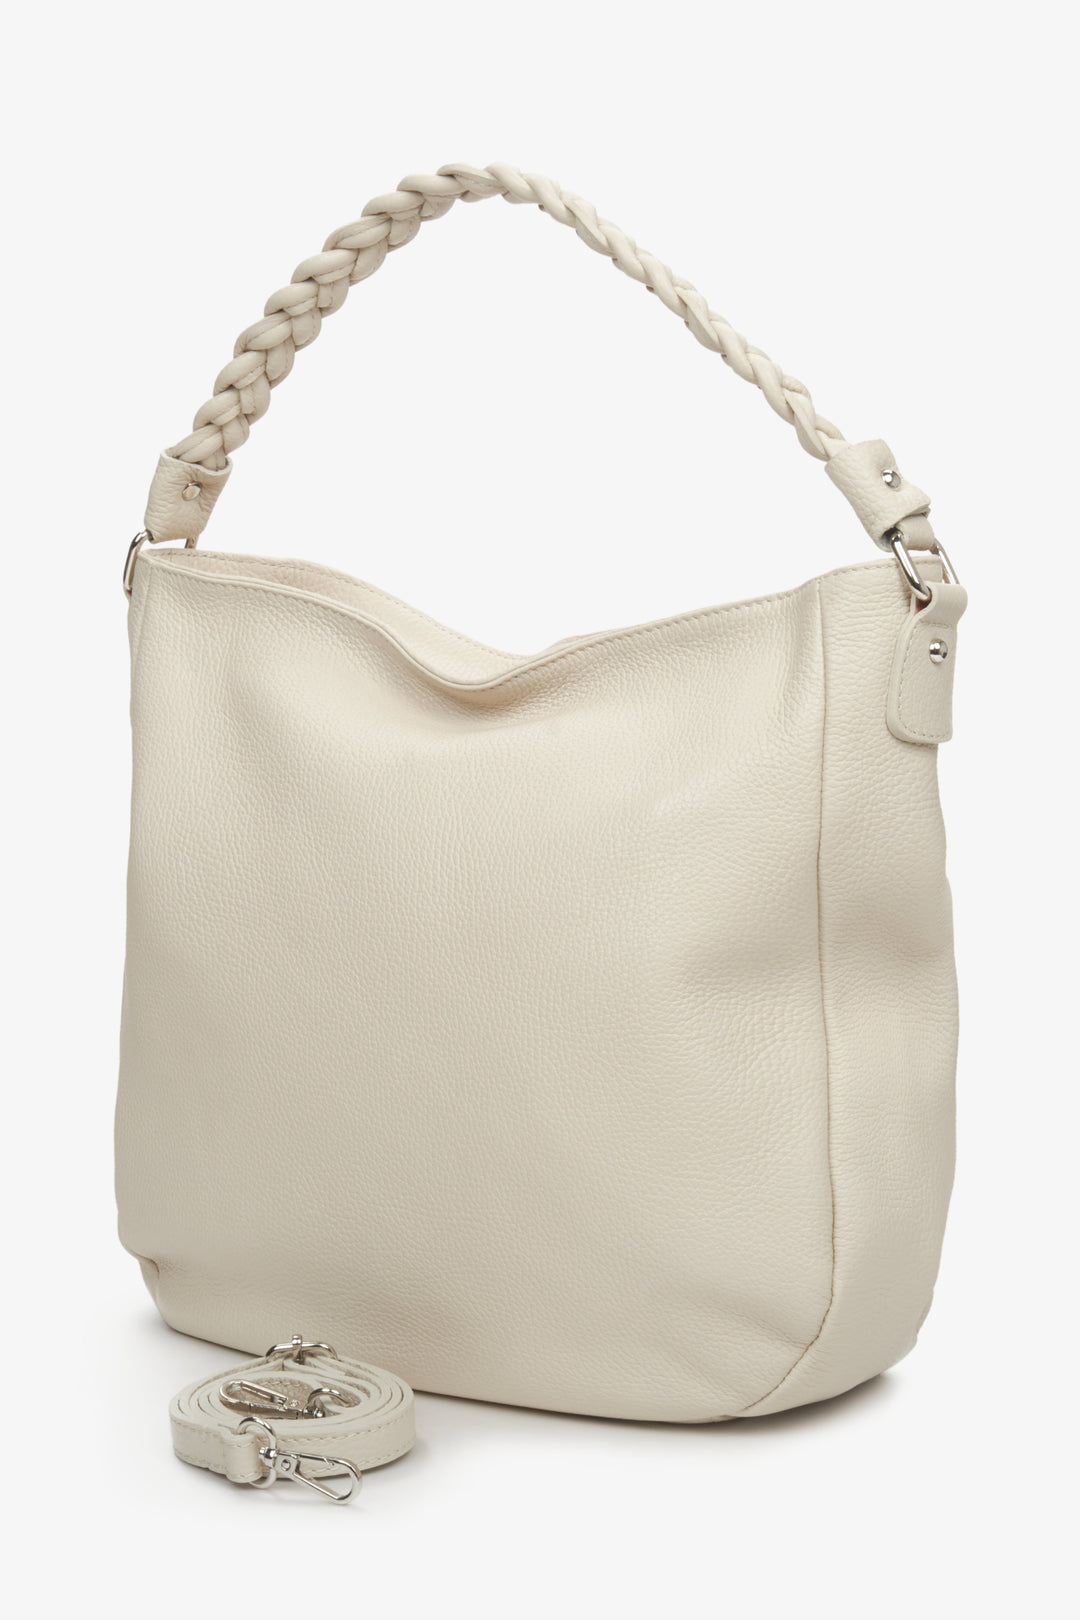 Women's light beige Estro handbag made of natural leather with extra adjustable strap.